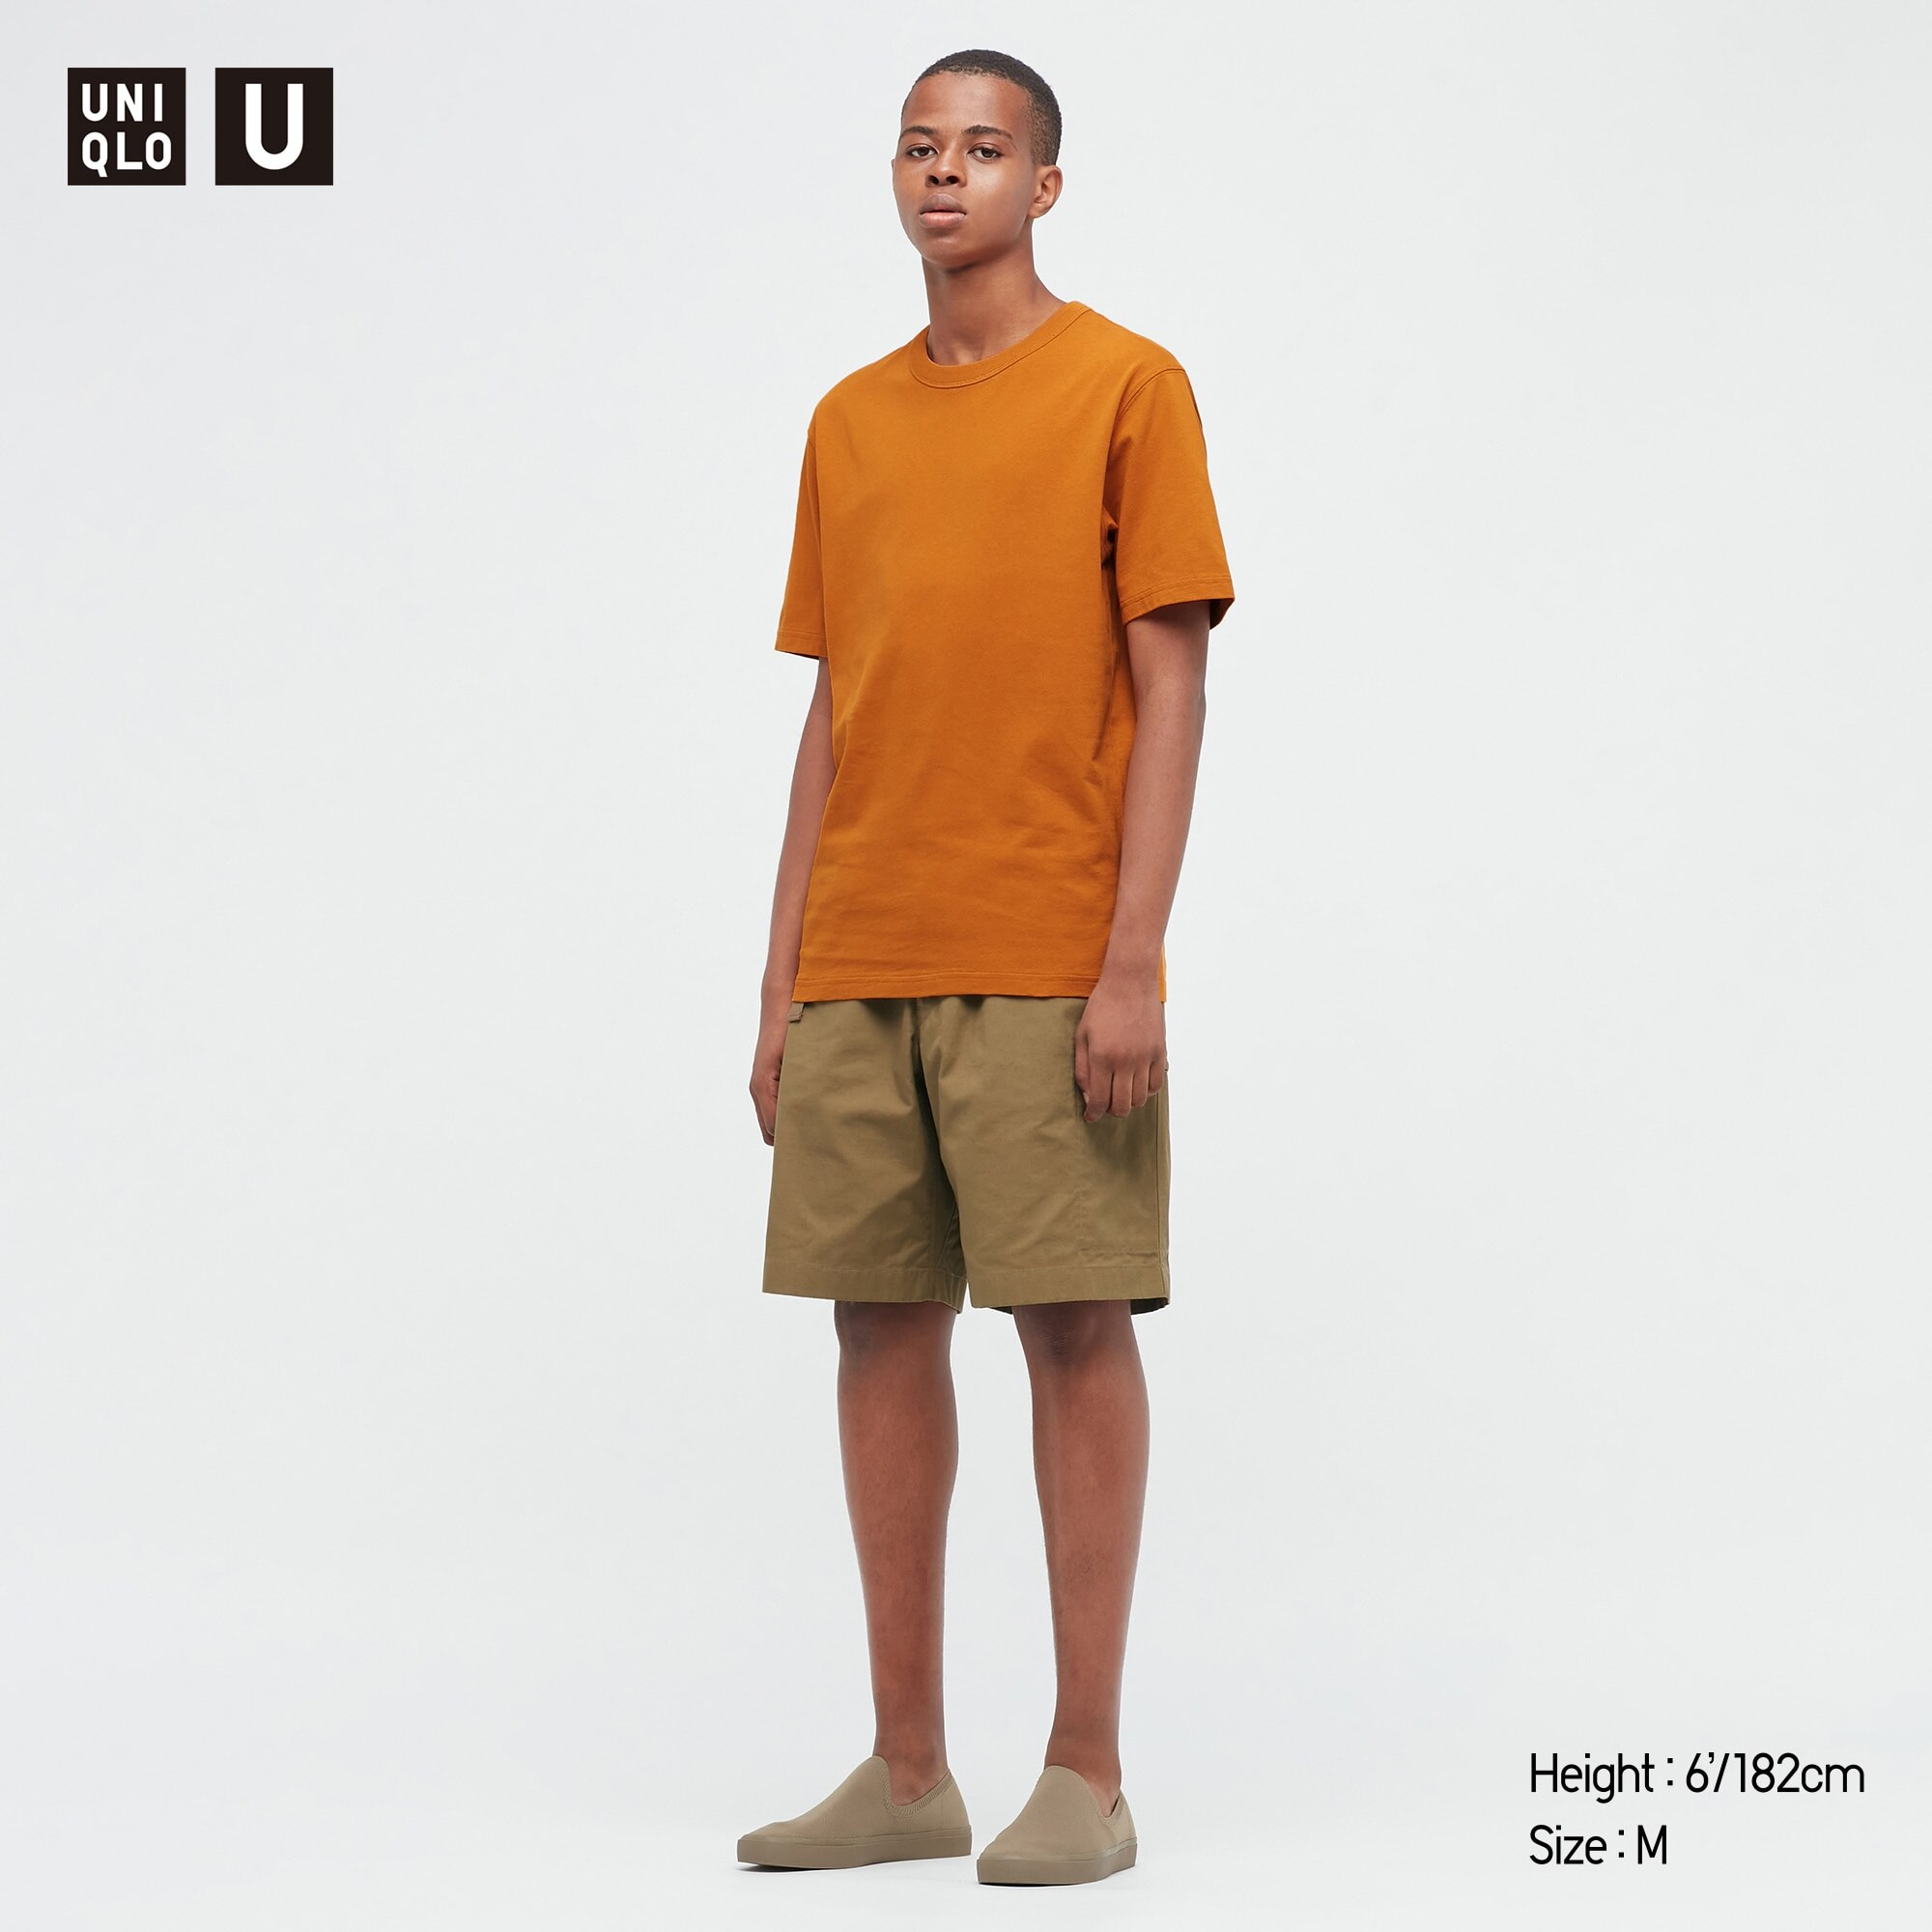 UNIQLO AUSTRALIA on Instagram Our Uniqlo U AIRism Cotton Oversized  TShirt is a summer staple made from doublefaced jersey with cooltouch  AIRism technology Shop now